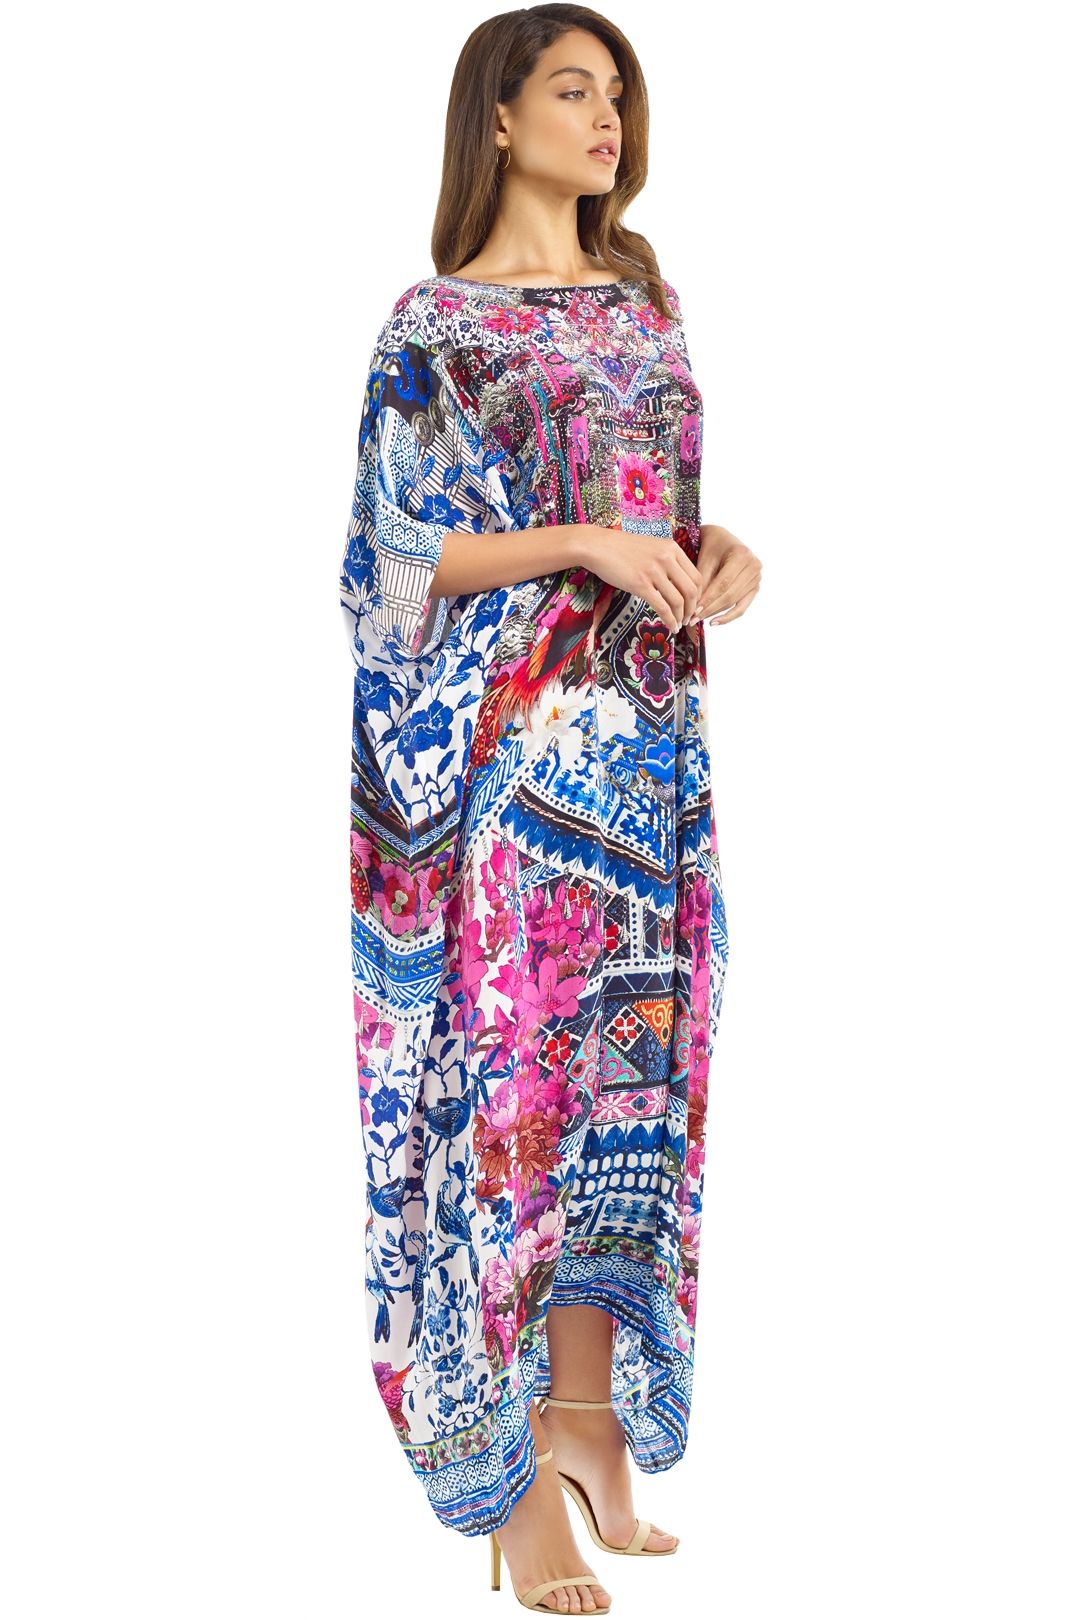 Bohemian Paradise Kaftan in Blue by Camilla for Rent